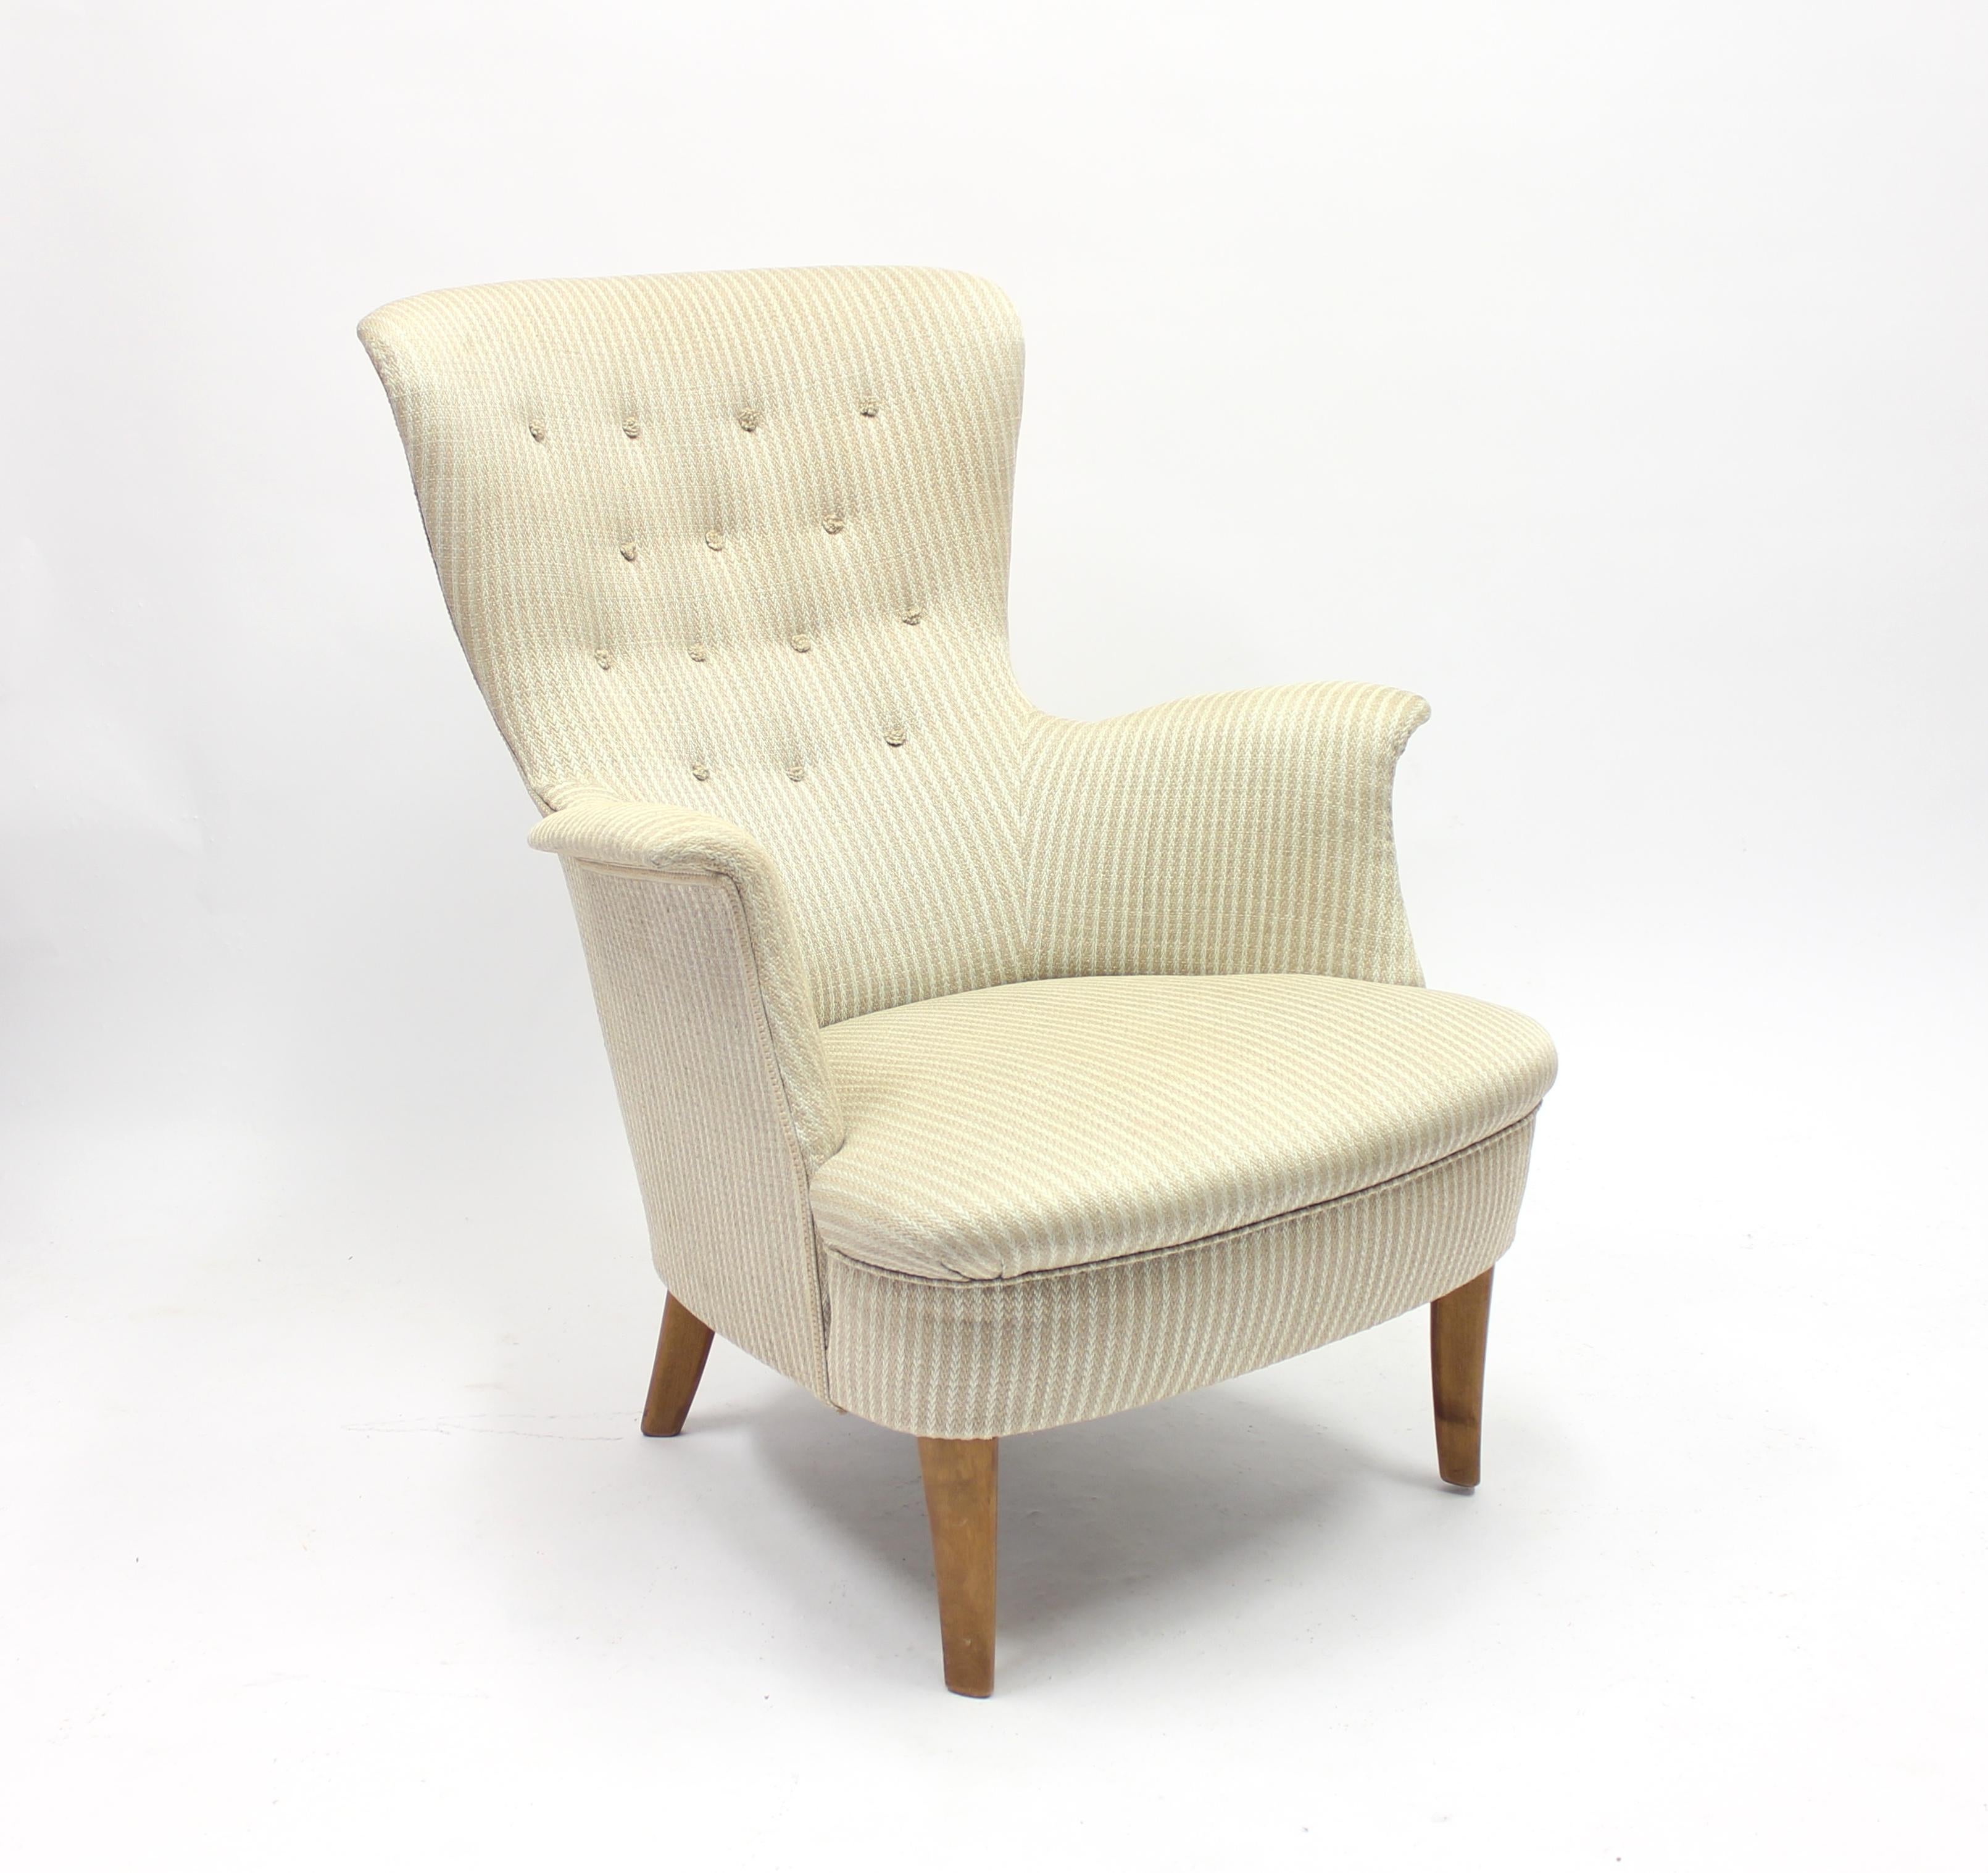 Rare lounge chair by Carl Malmsten, Sweden, 1950s. Upholseter in a striped light brown and white/beige fabric, legs made of stained birch. Stamped CM (for Carl Malmsten) on right back leg.